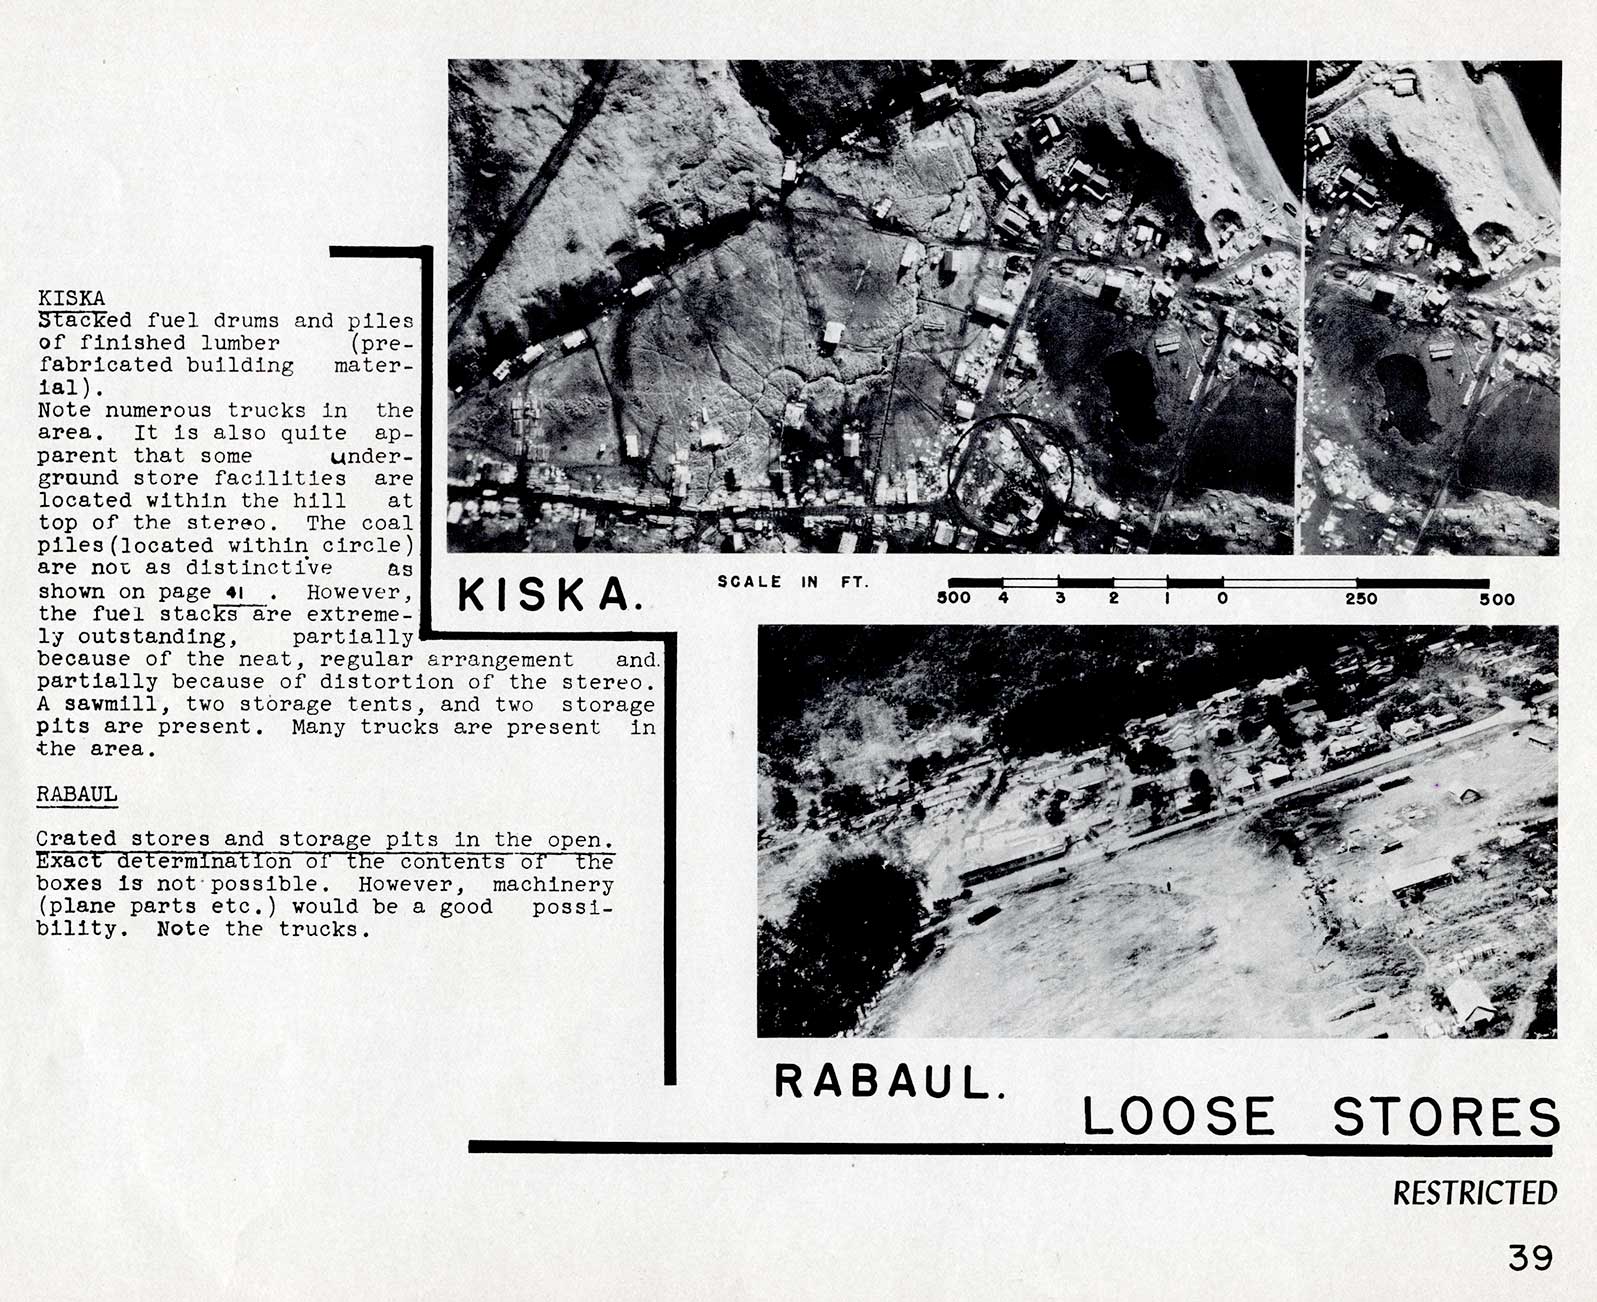 LOOSE STORESKISKA Stacked fuel drums and piles of finished lumber (pre-fabricated building material).Note numerous trucks in the area. It is also quite apparent that some underground store facilities are located within the hill at top of the stereo. The coal piles(located within circle) are not as distinctive as shown on page 41. However, the fuel stacks are extremely outstanding, partially because of the neat, regular arrangement and. partially because of distortion of the stereo. A sawmill, two storage tents, and two storage pits are present. Many trucks are present in the area.RABAUL Crated stores and storage pits in the open. Exact determination of the contents of the boxes is not possible. However, machinery (plane parts etc.) would be a good possibility. Note the trucks.39